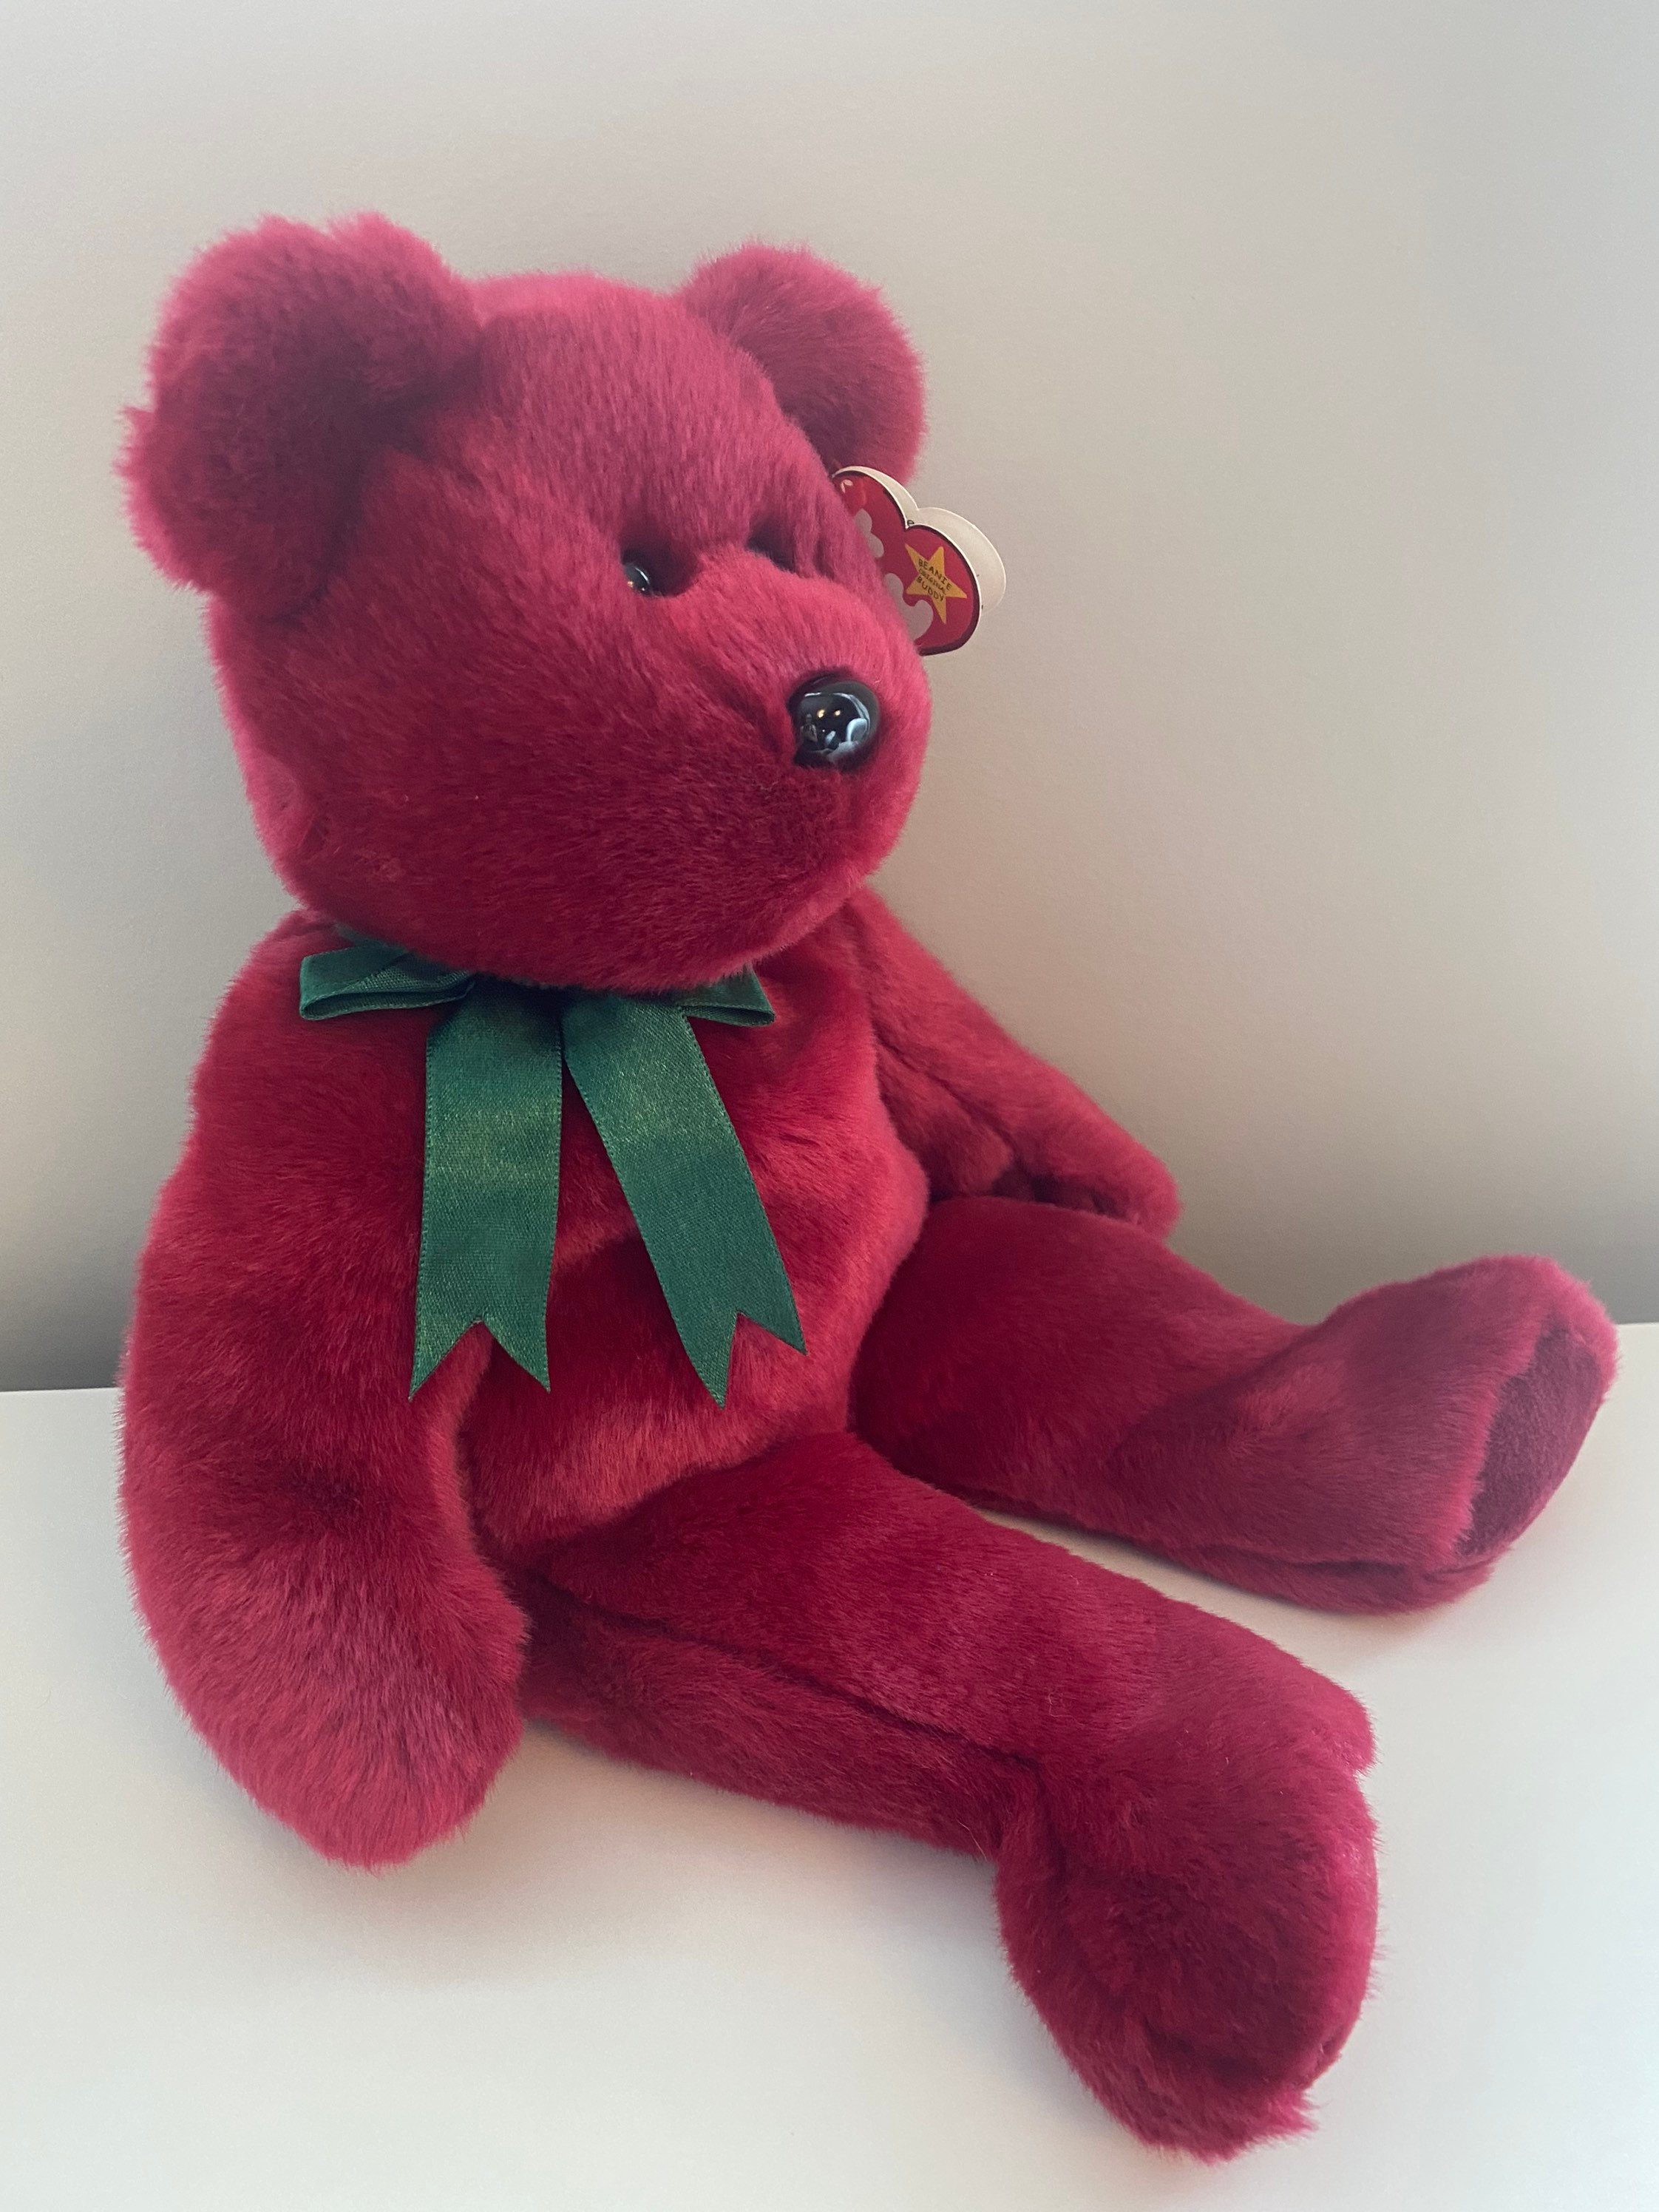 TY CRANBERRY the TEDDY BEAR BEANIE BUDDY MINT with MINT TAGS 